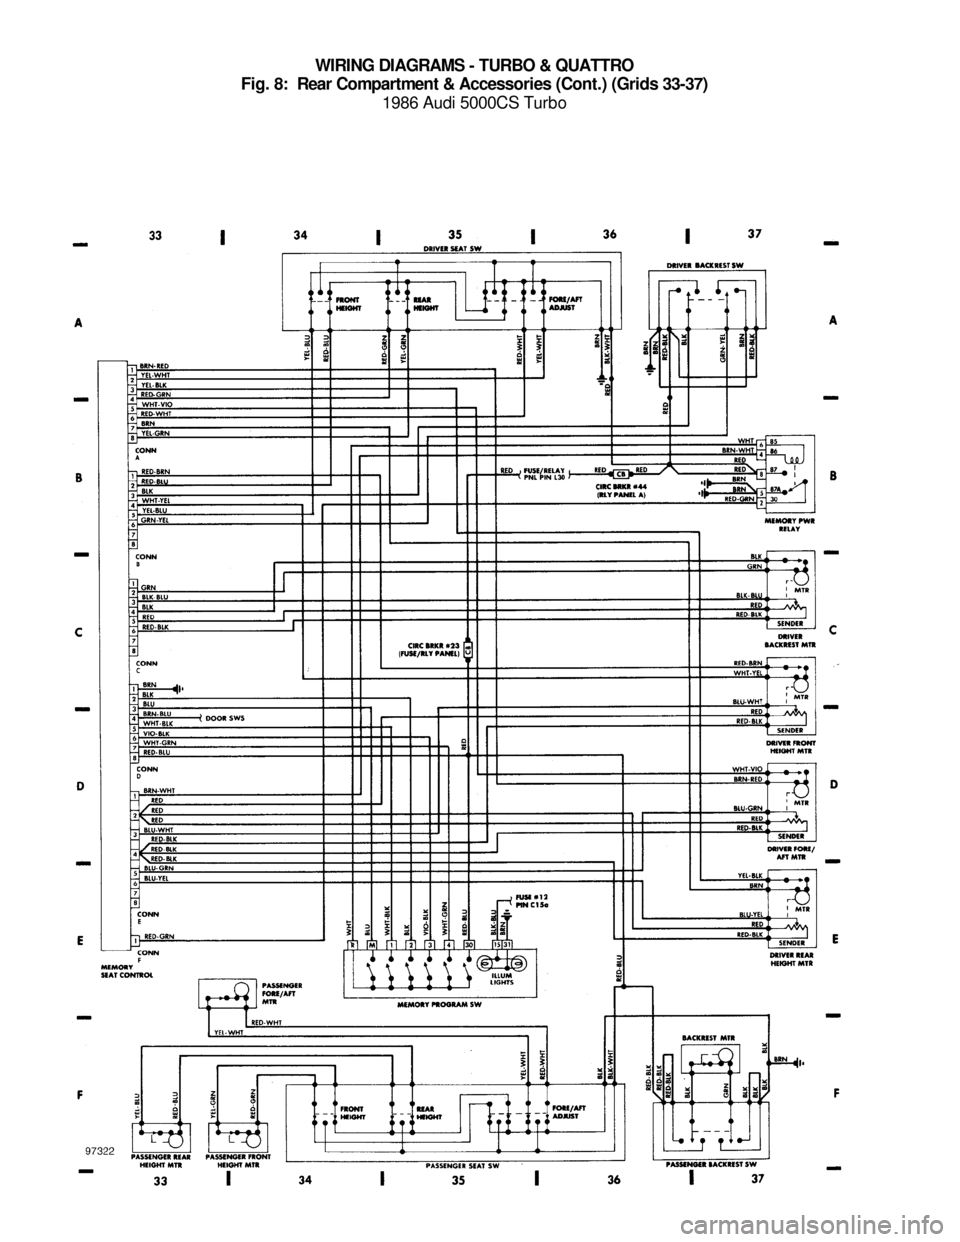 AUDI 5000CS 1986 C2 System Wiring Diagram WIRING DIAGRAMS - TURBO & QUATTRO
Fig. 8:  Rear Compartment & Accessories (Cont.) (Grids 33-37)
1986 Audi 5000CS Turbo
For x    
Copyright © 1998 Mitchell Repair Information Company, LLCMonday, July 